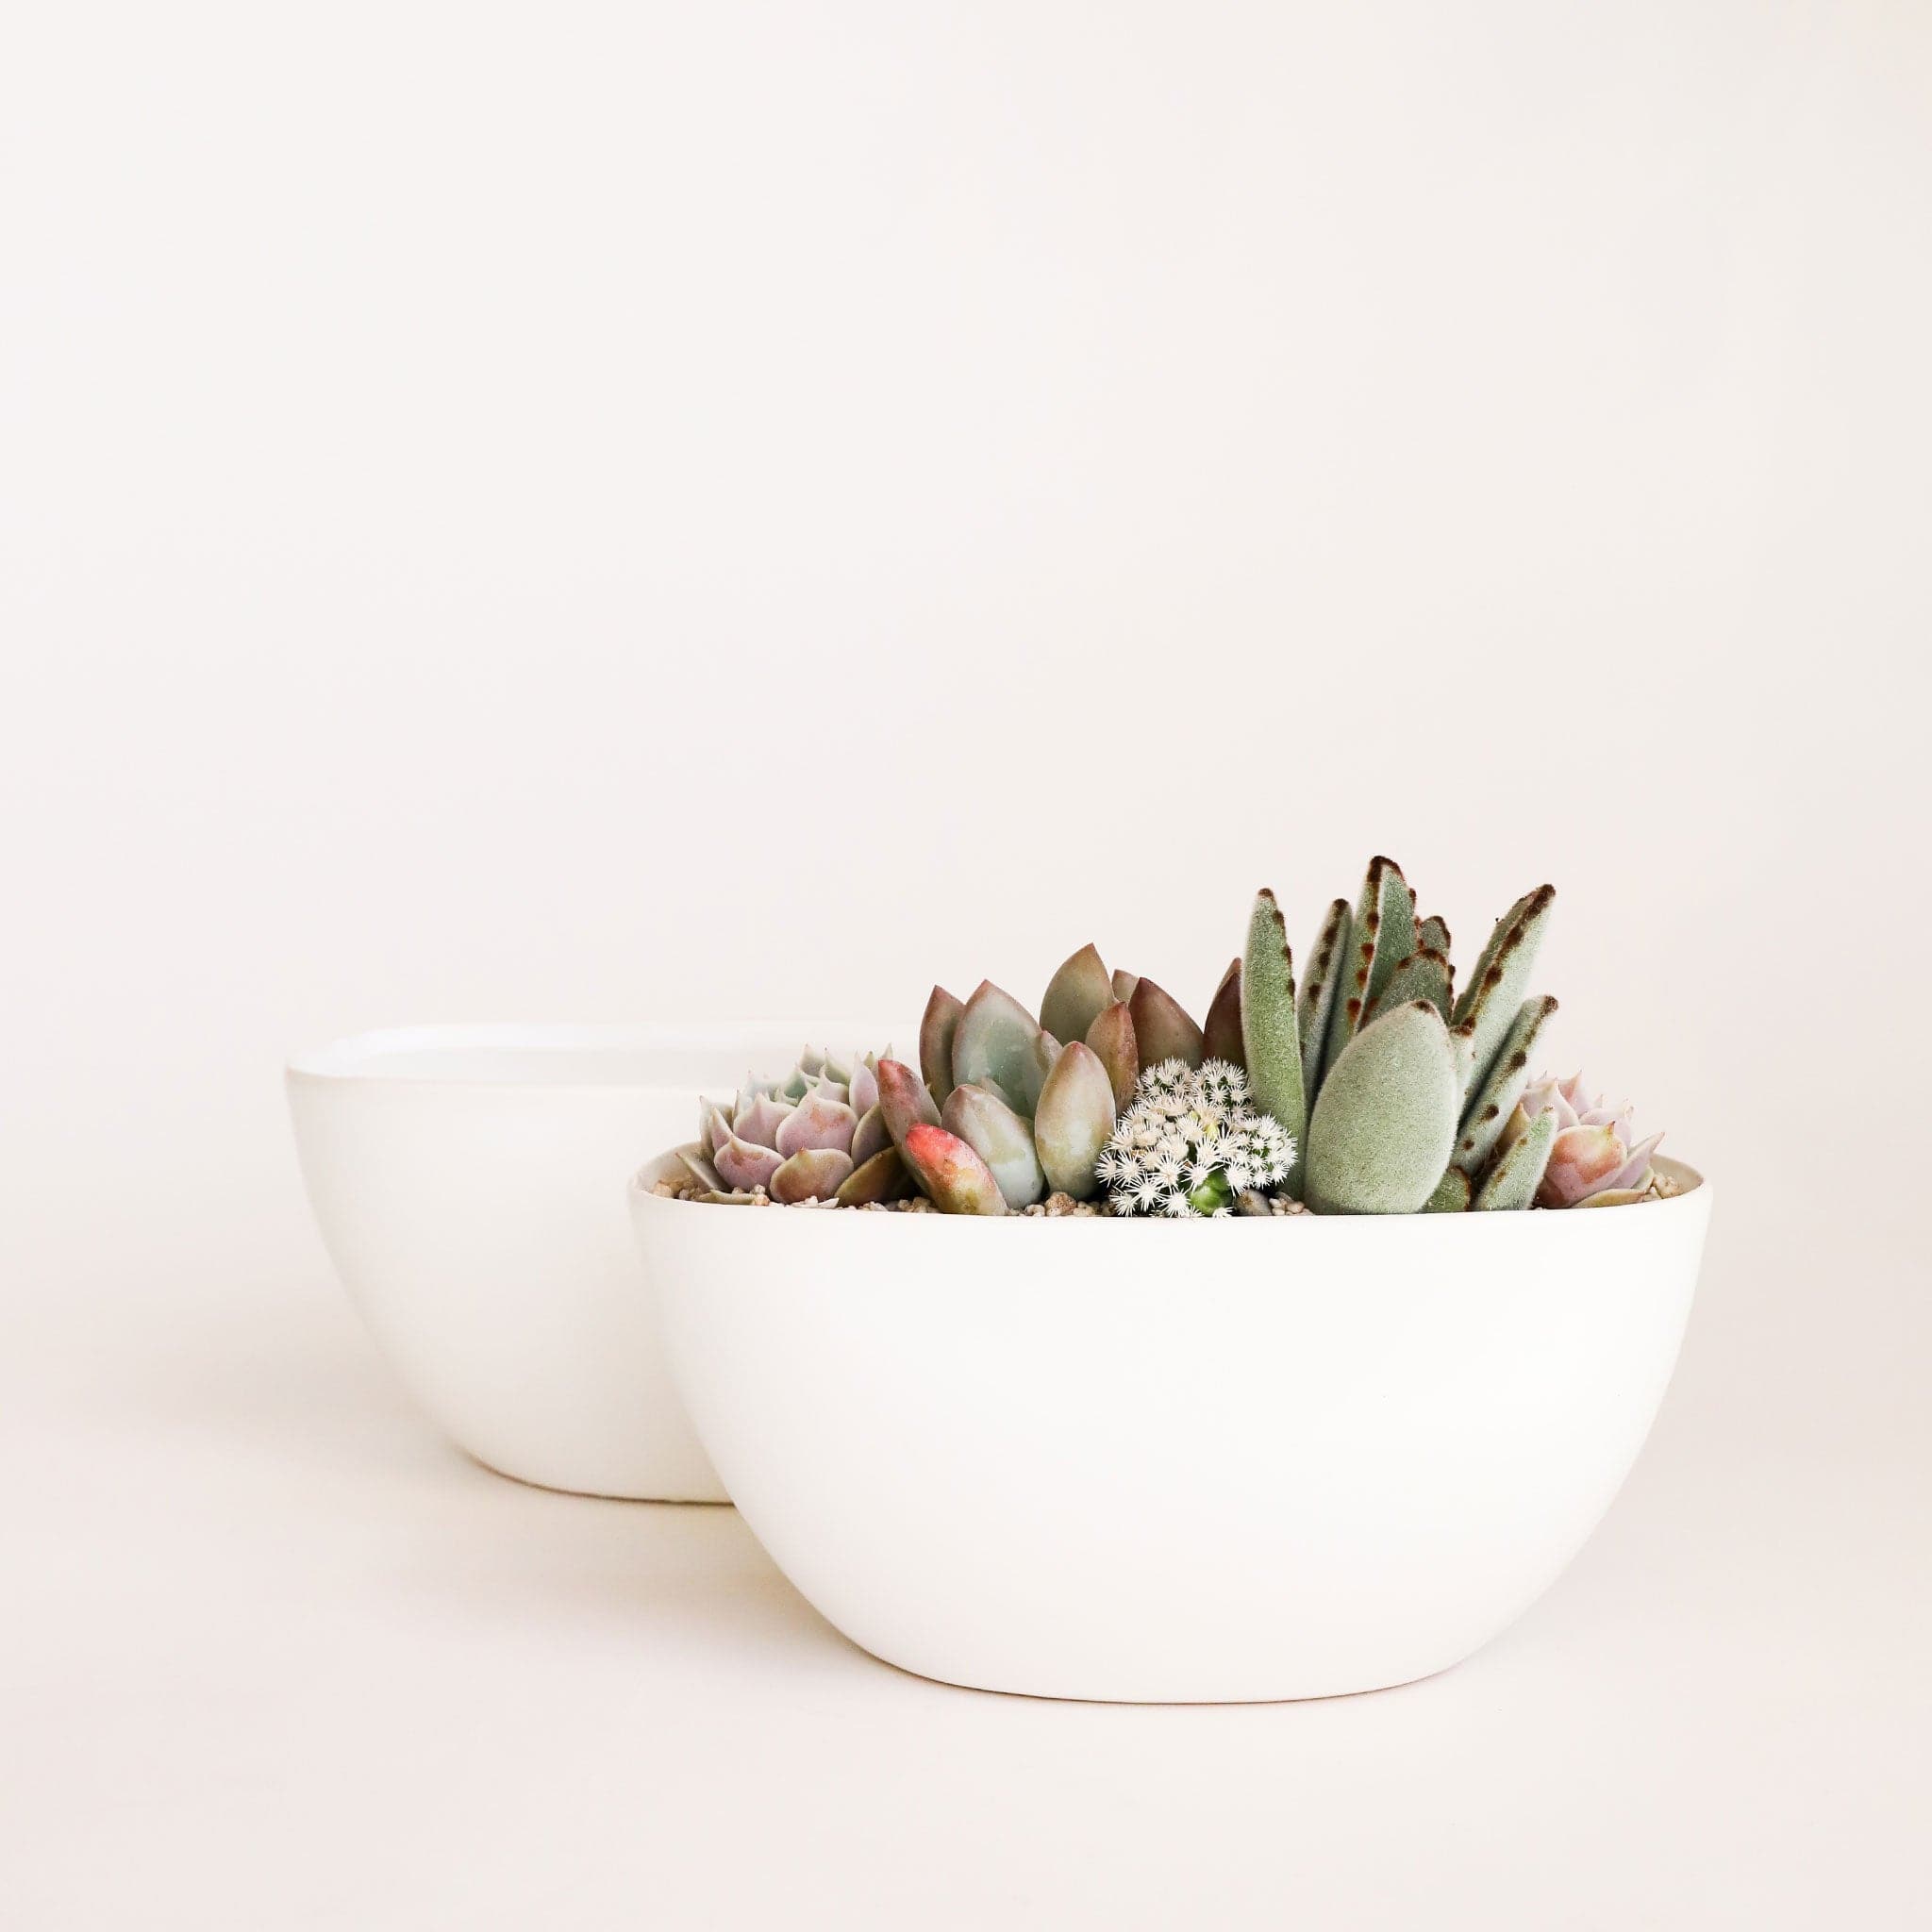 Two white ceramic boat shaped bowls are layered one in front of the other. The front bowl is filled with a delicate succulent arrangement that includes a variety of pale green and purple succulent plantings.  